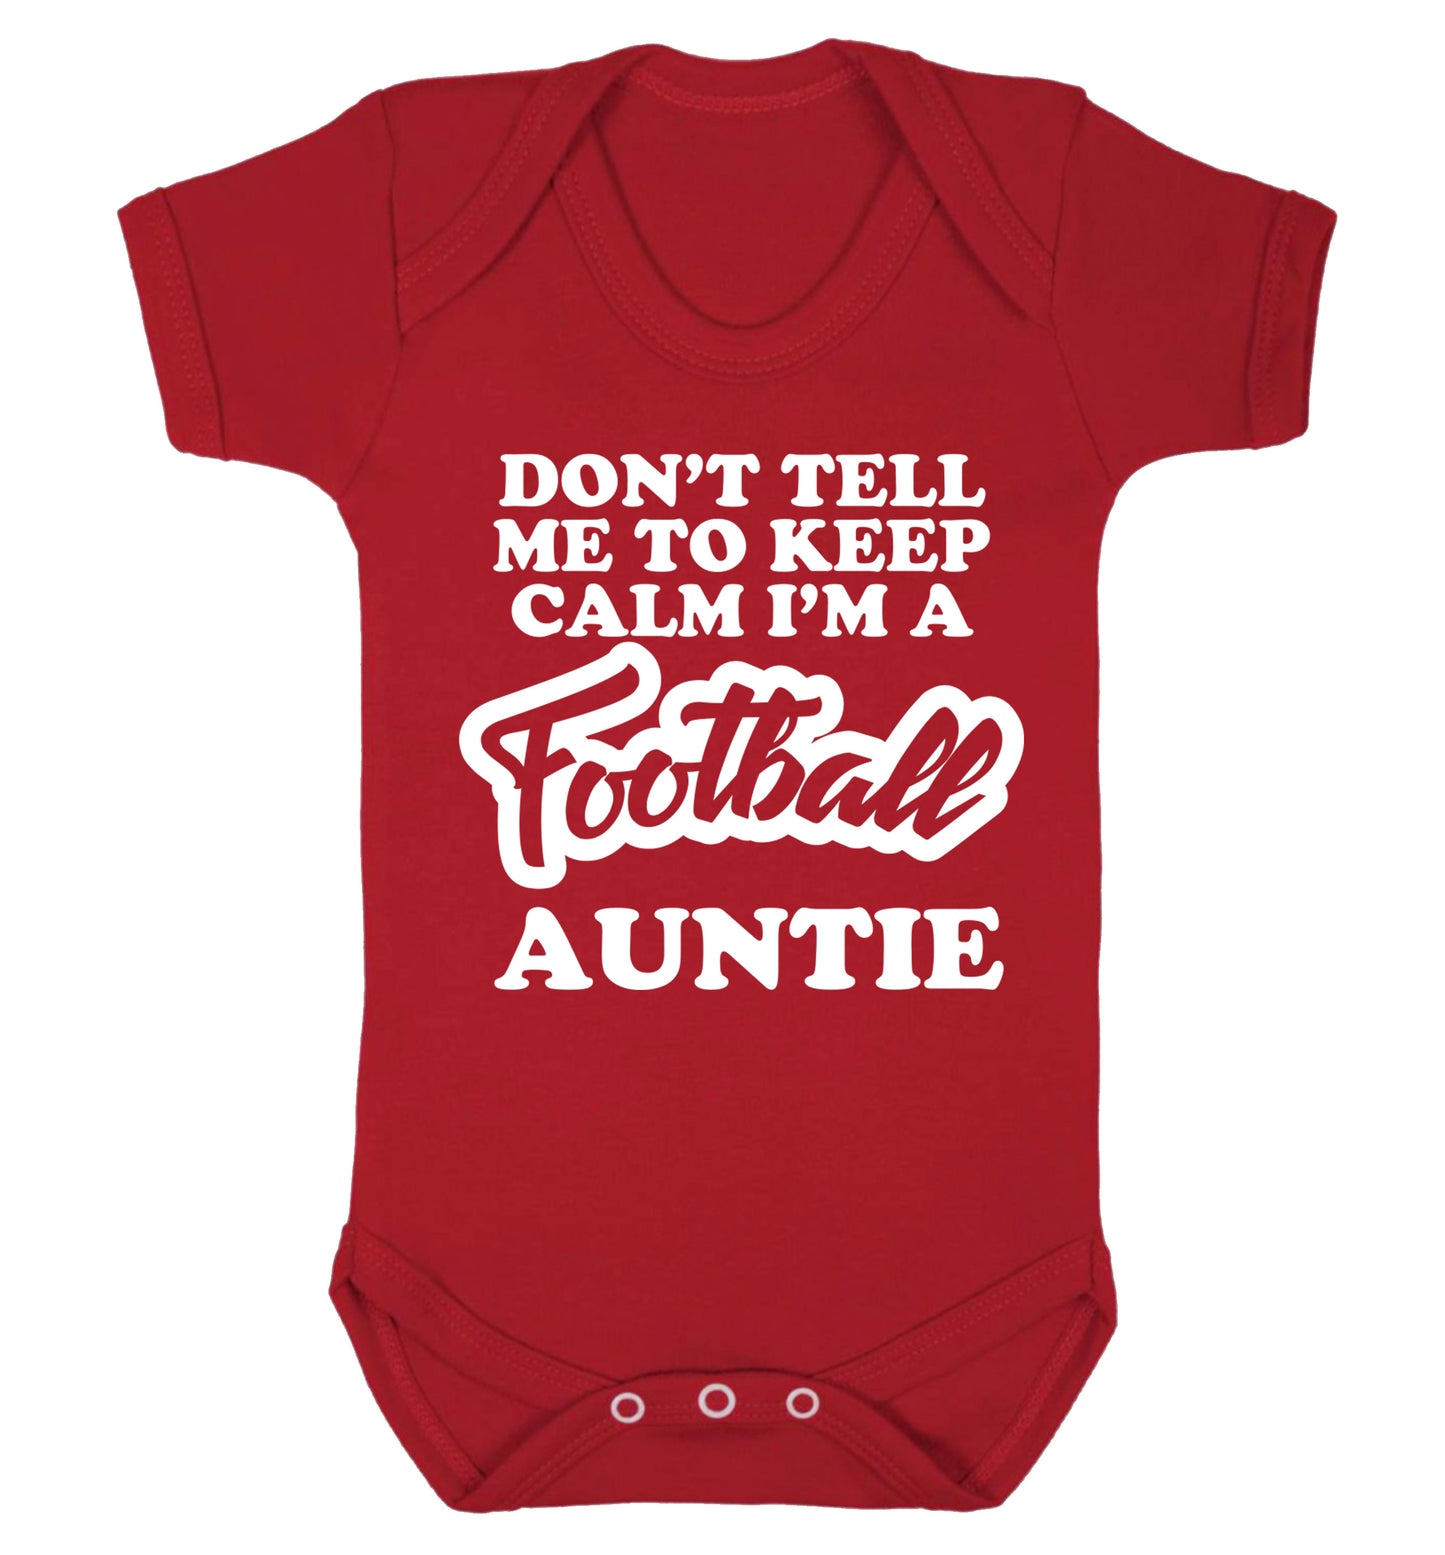 Don't tell me to keep calm I'm a football auntie Baby Vest red 18-24 months